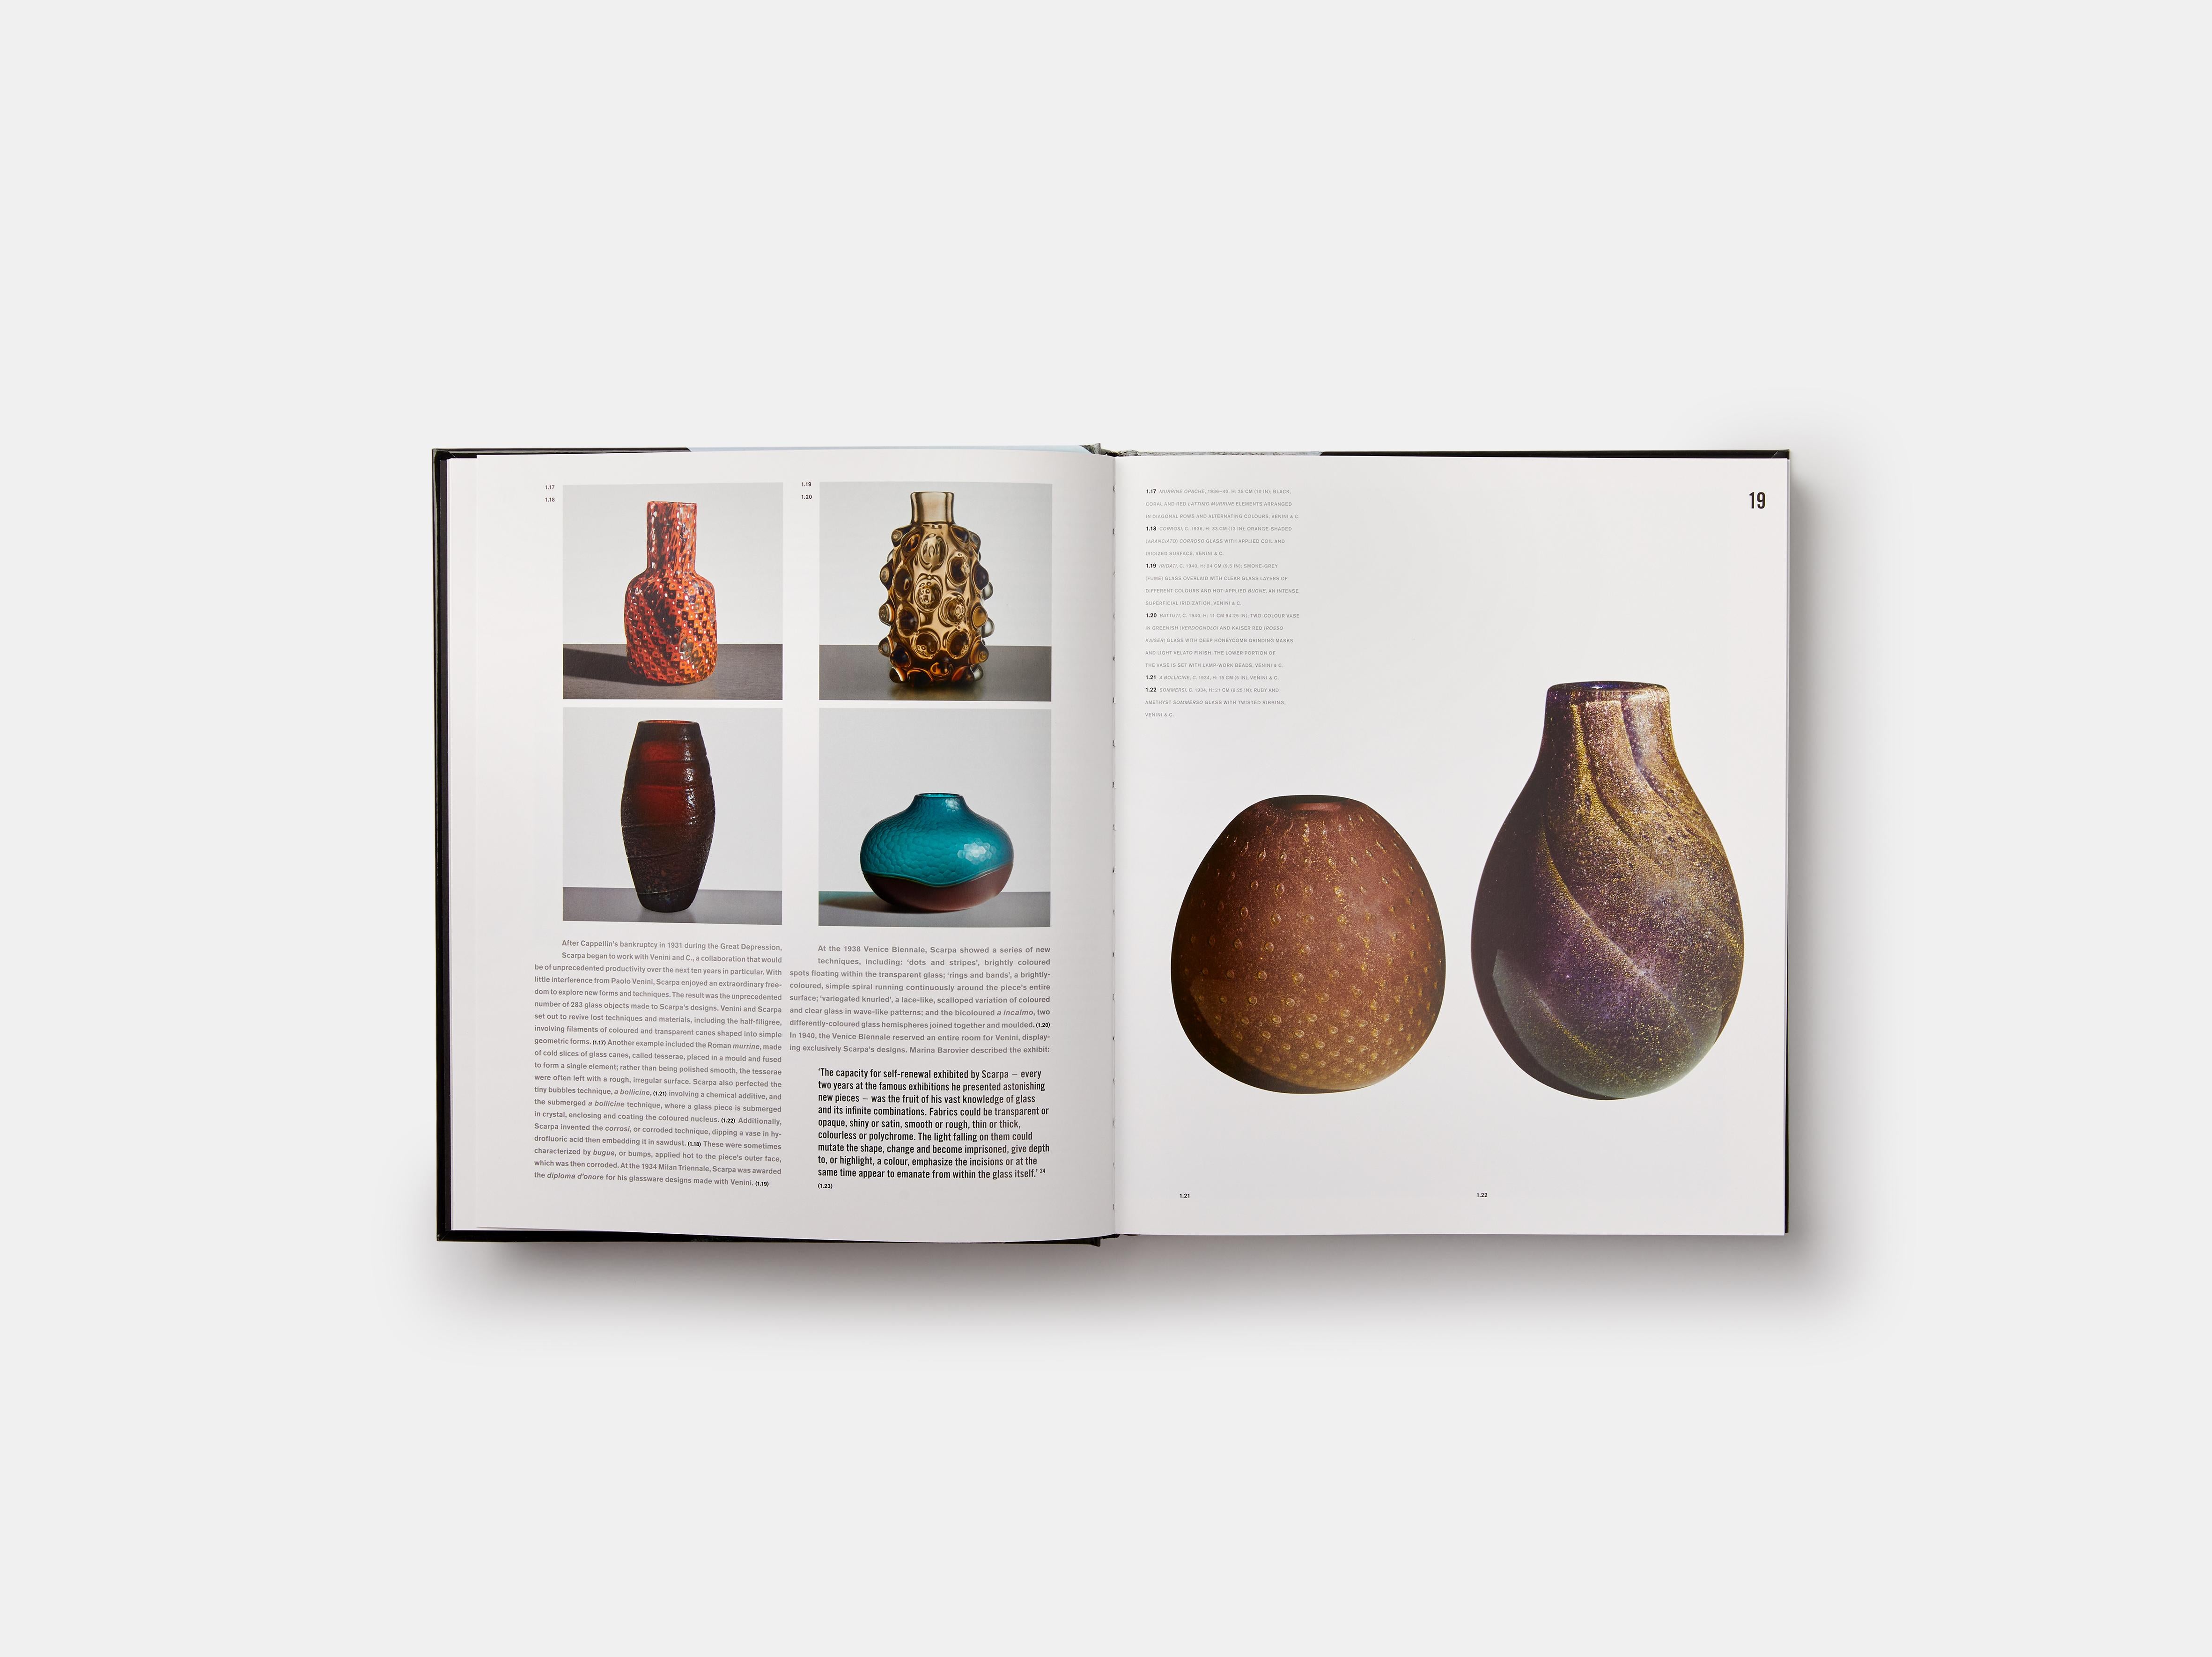 The acclaimed survey of the life and works of the celebrated Italian modernist master, available again in a classic format

The work of Carlo Scarpa challenged, and continues to challenge, accepted notions of modern architecture. While several